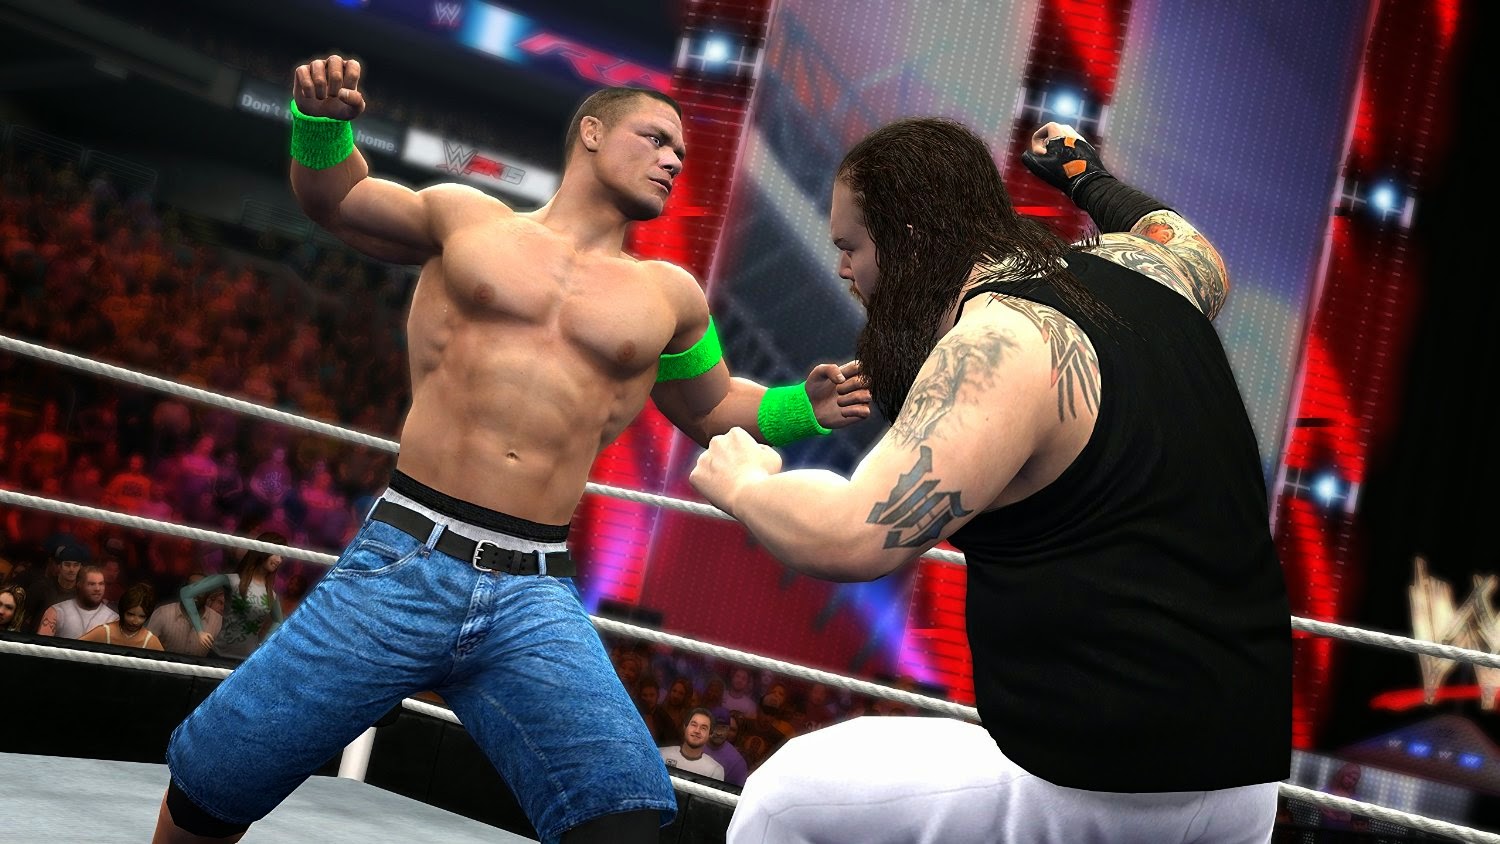 Wwe 2k16 Game For